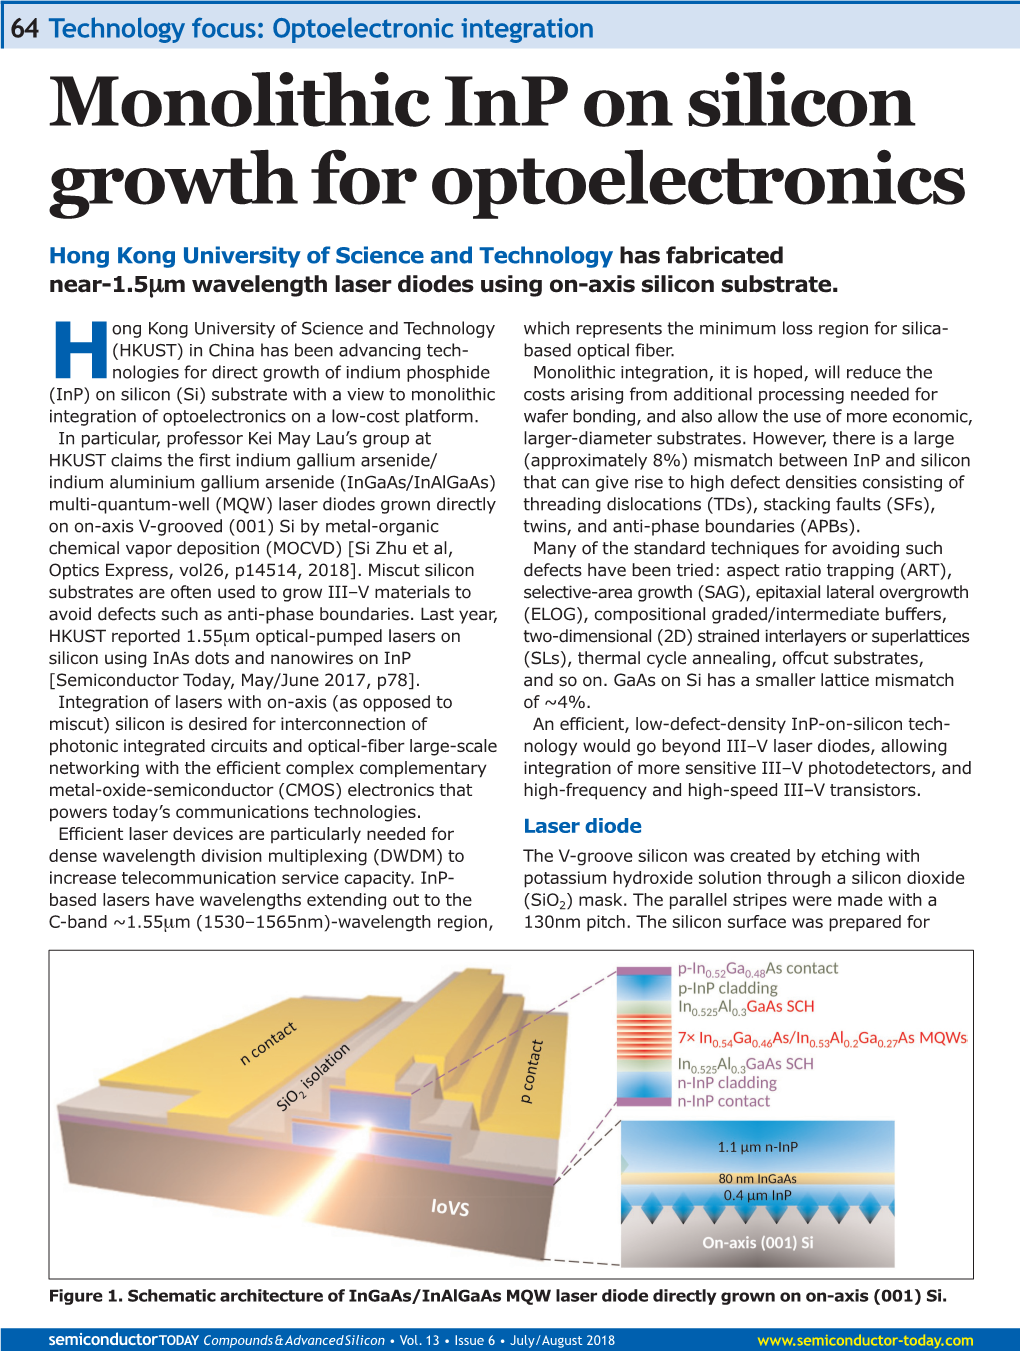 Monolithic Inp on Silicon Growth for Optoelectronics